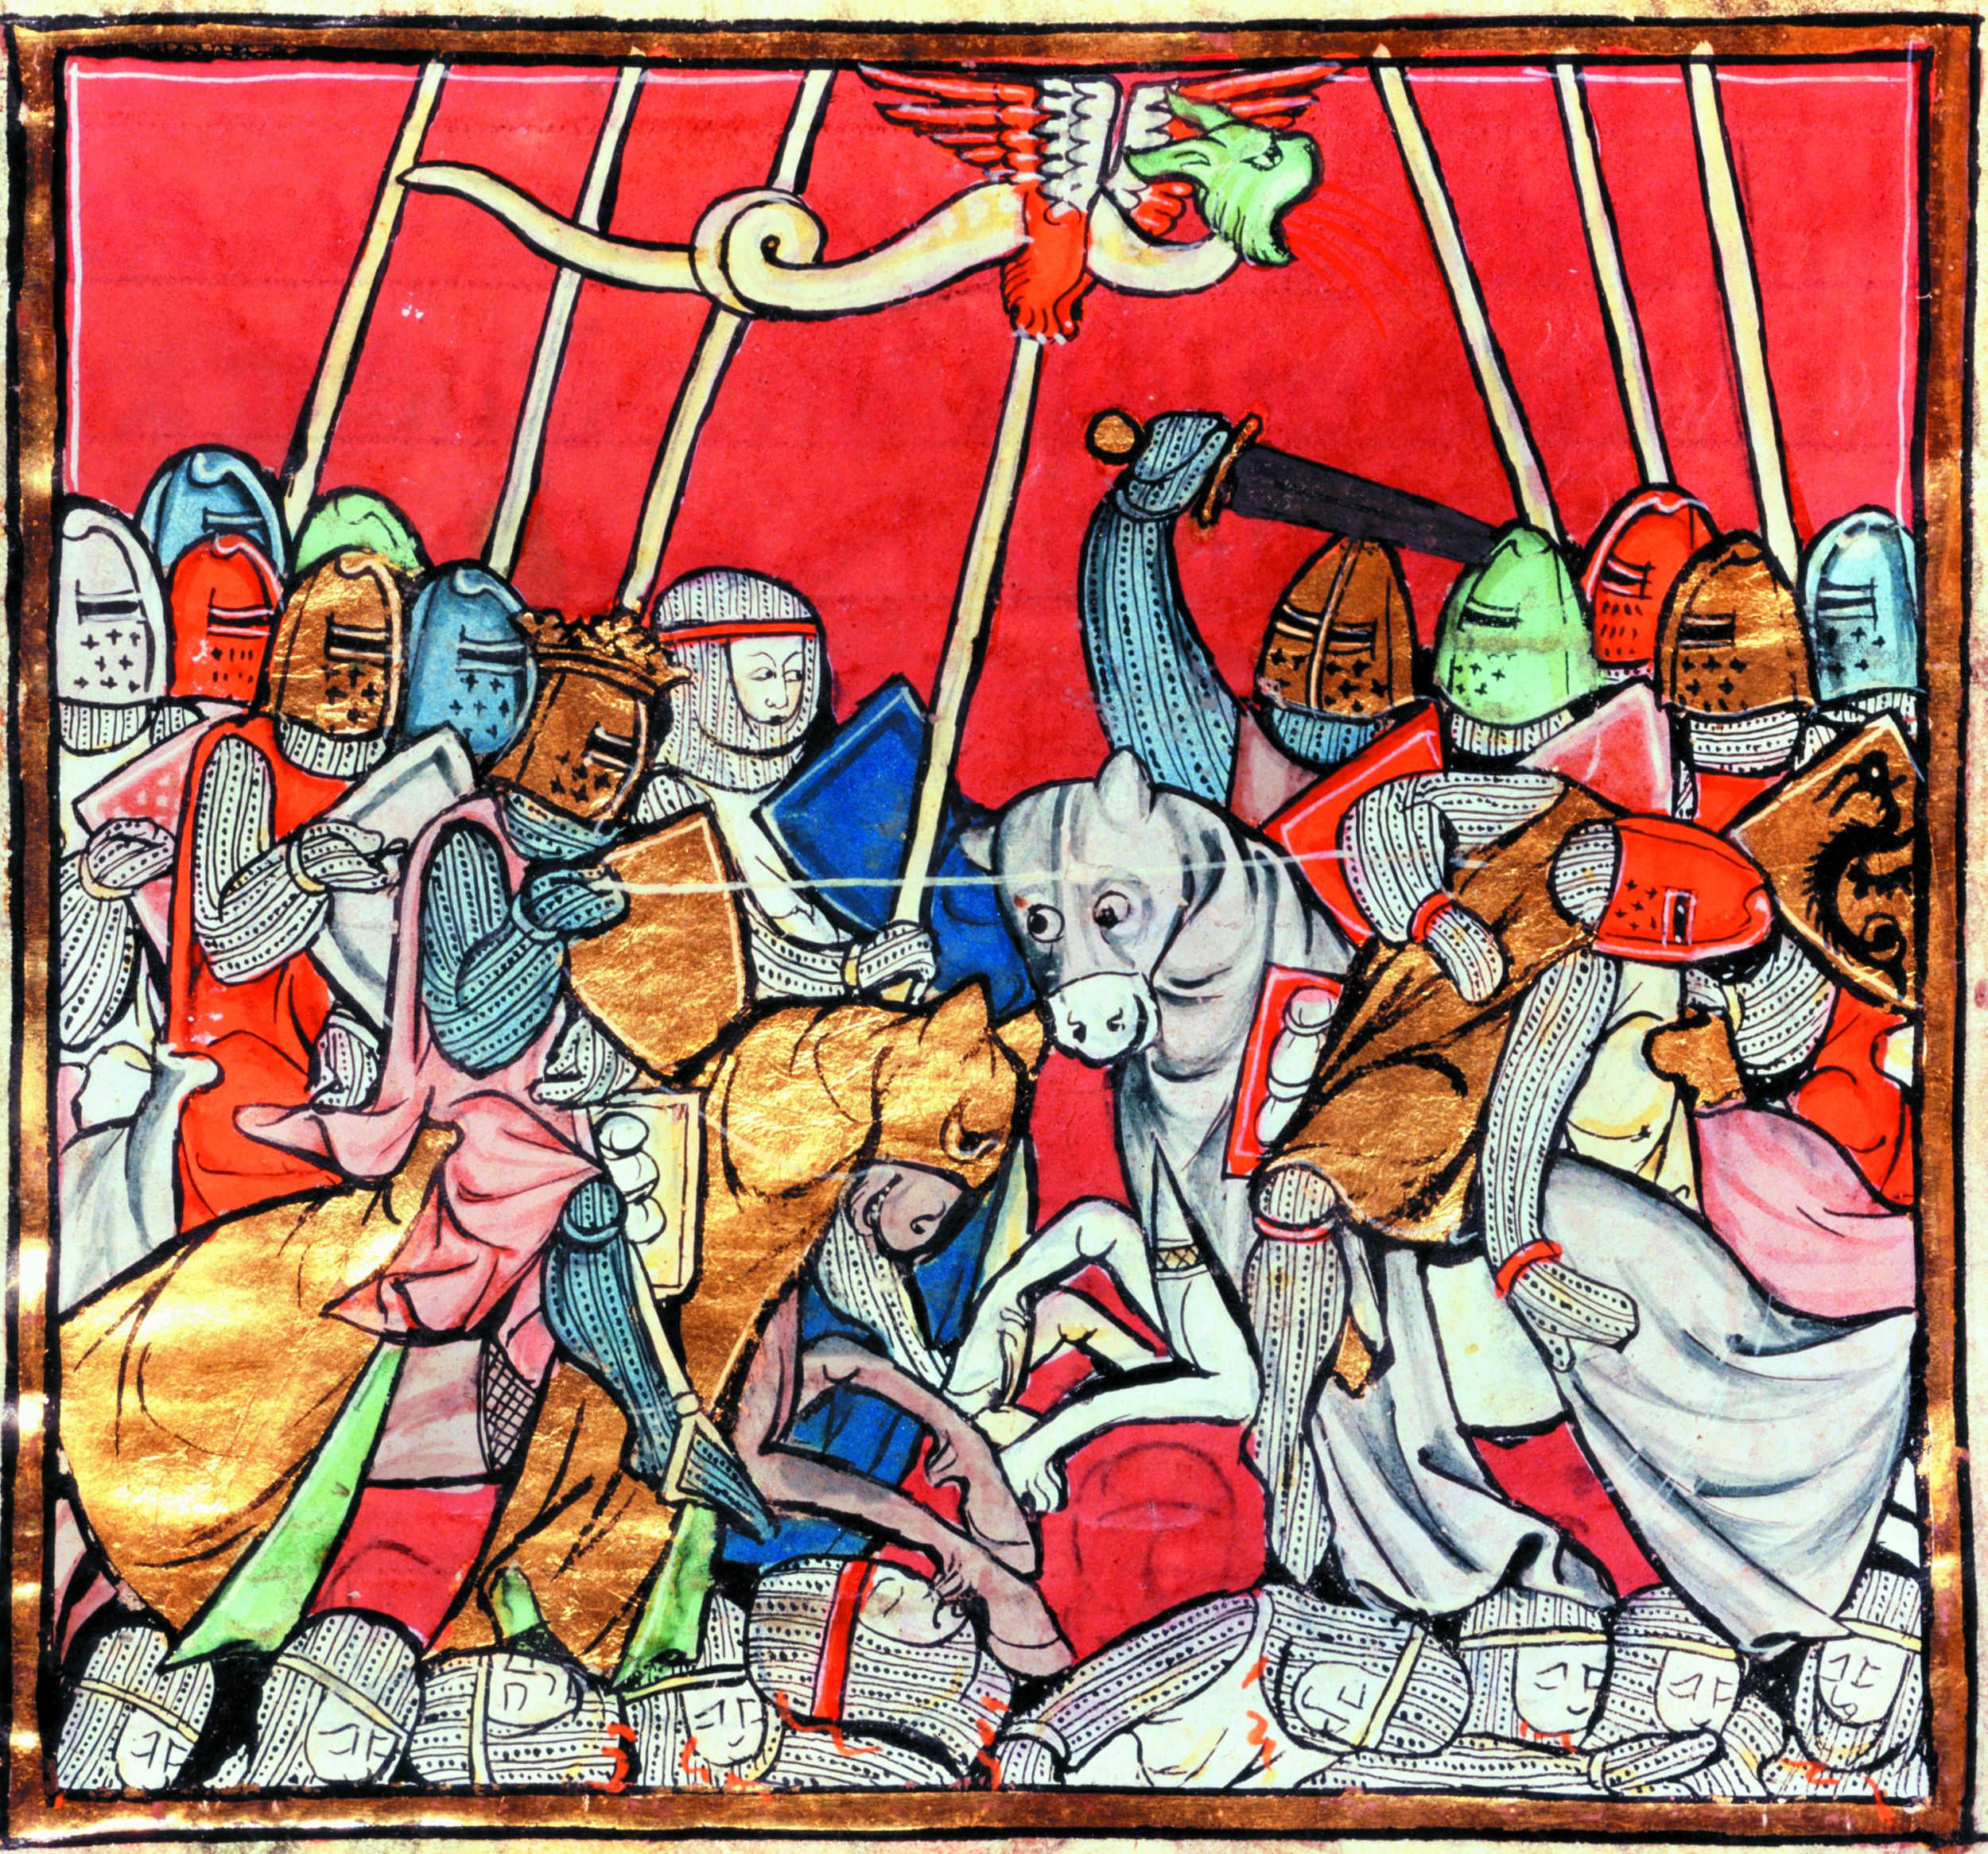 Leading from the front, Arthur wades into combat in this 14th-century painting by Robert de Barron in the Histoire de Merlin. Despite his reputation, Arthur was never a true king.